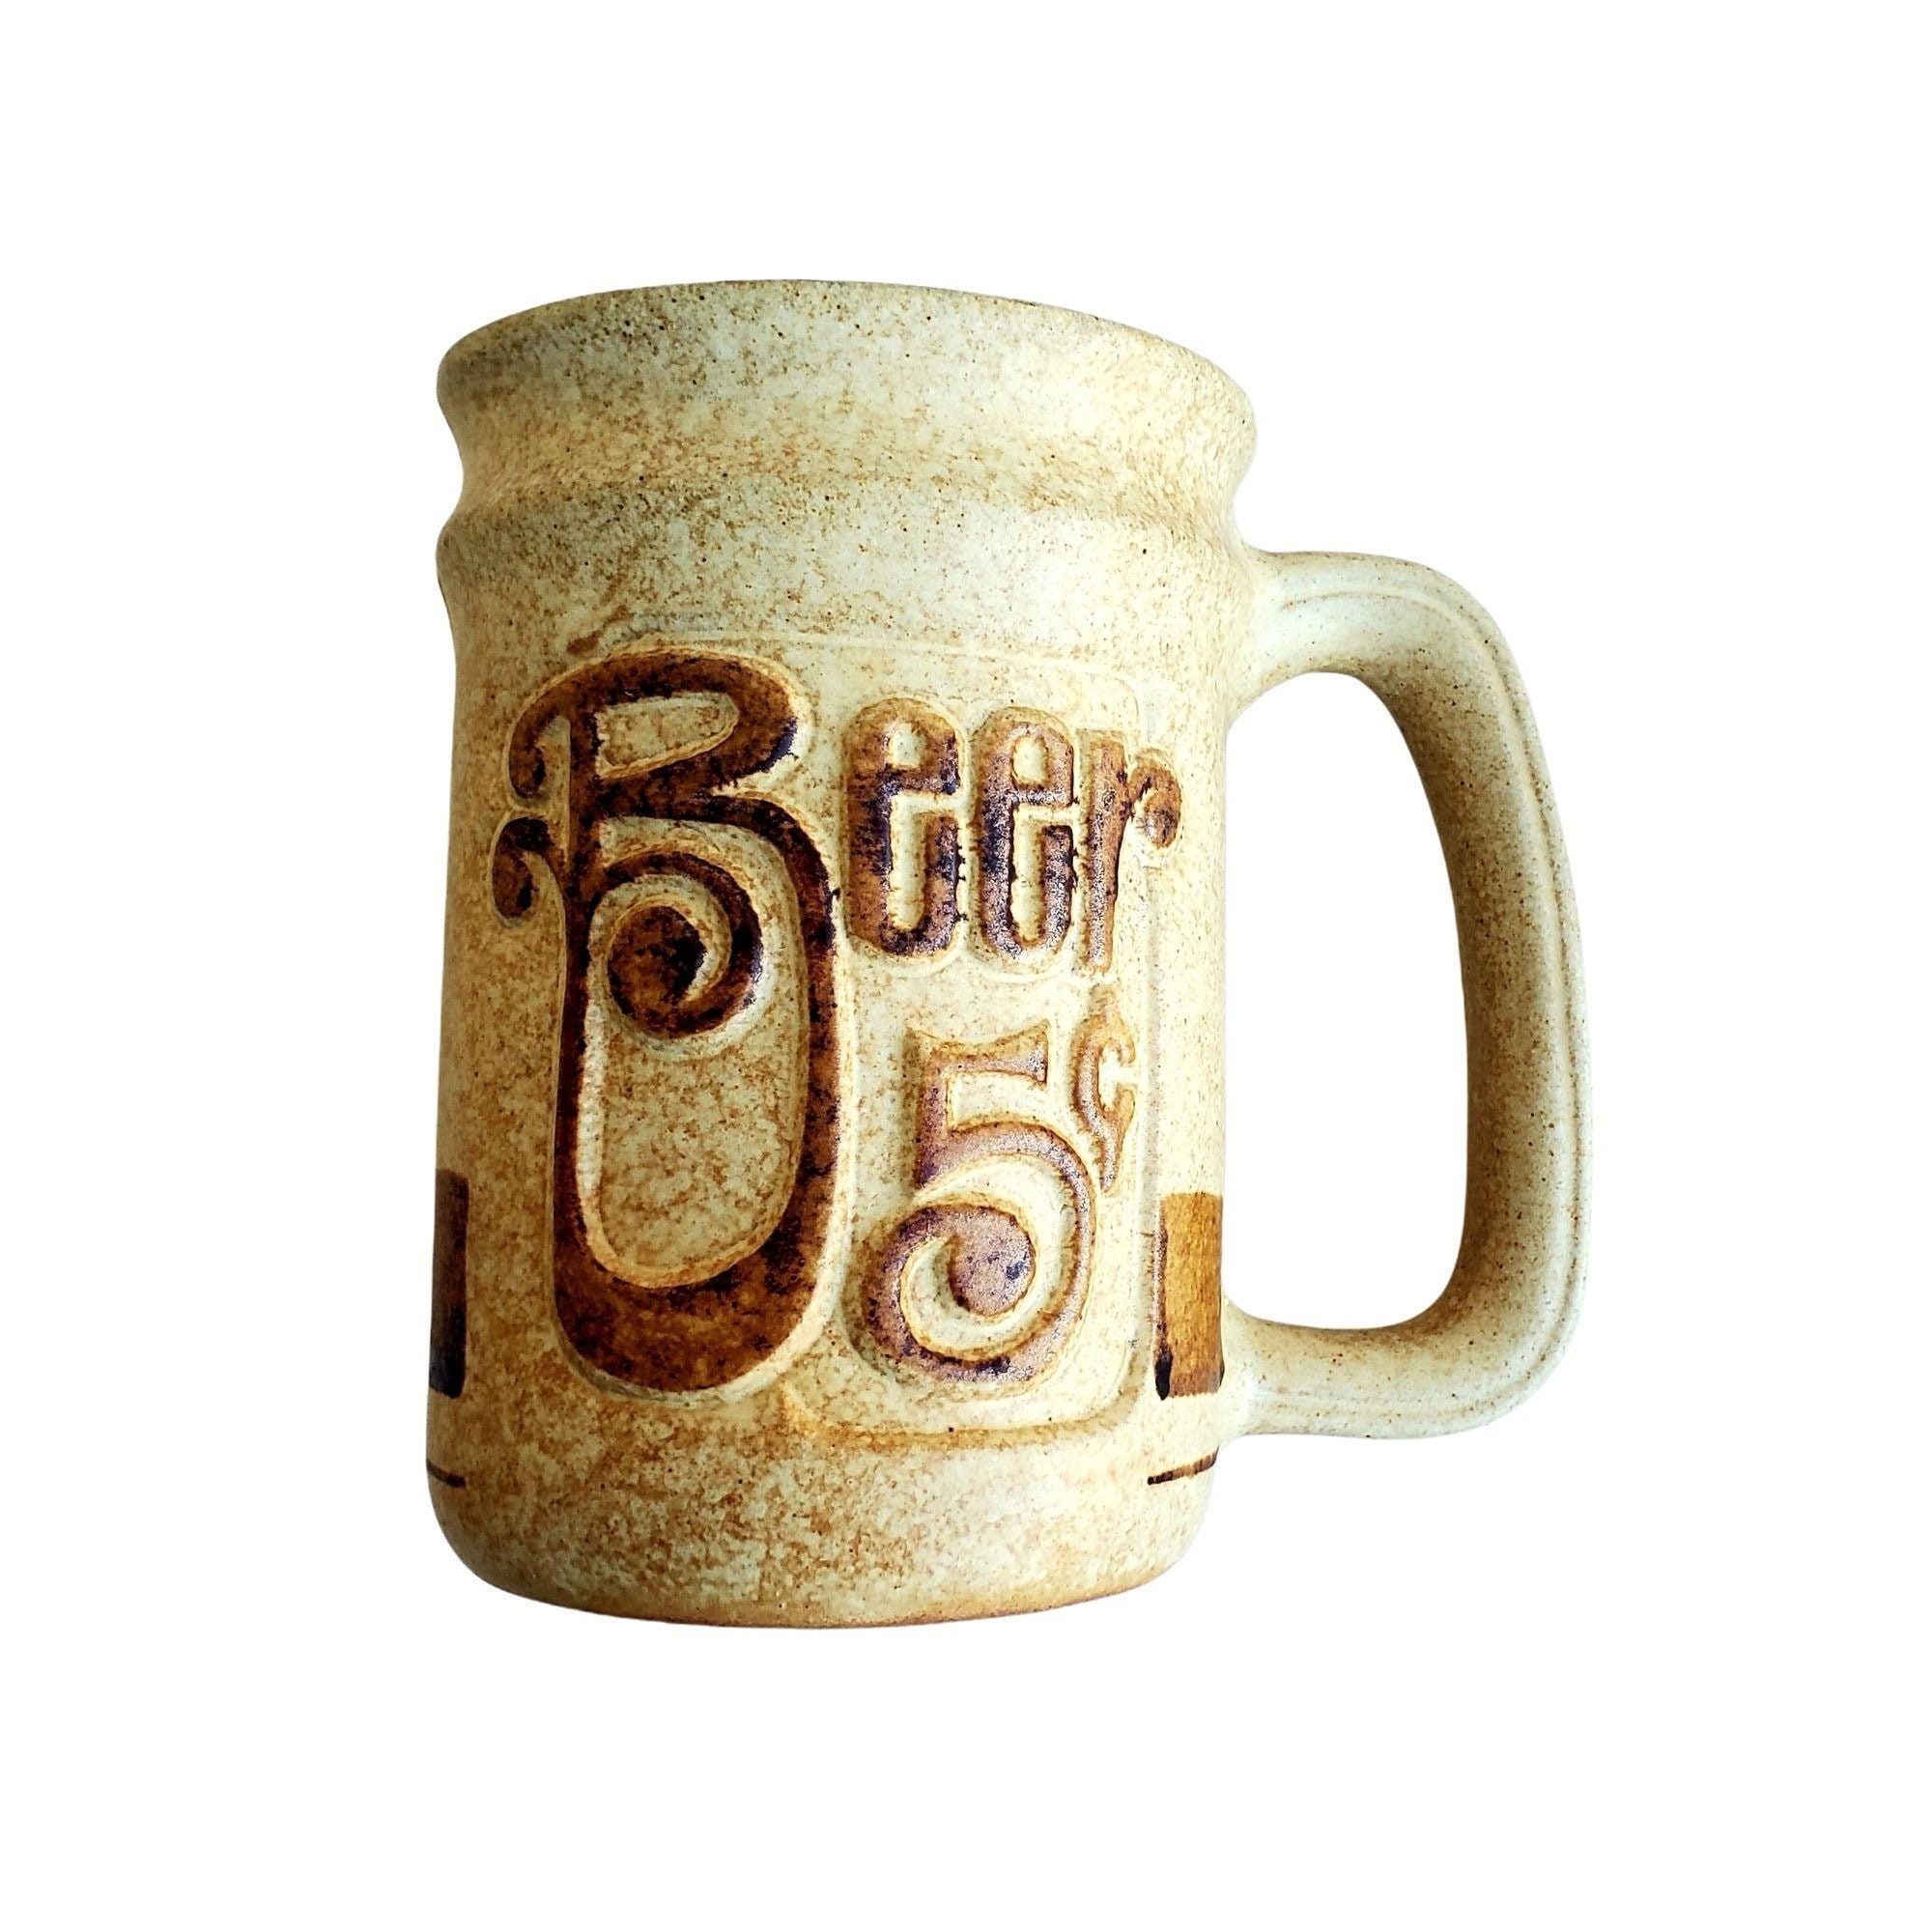 Recycled Sari Tote - Brewery Pottery